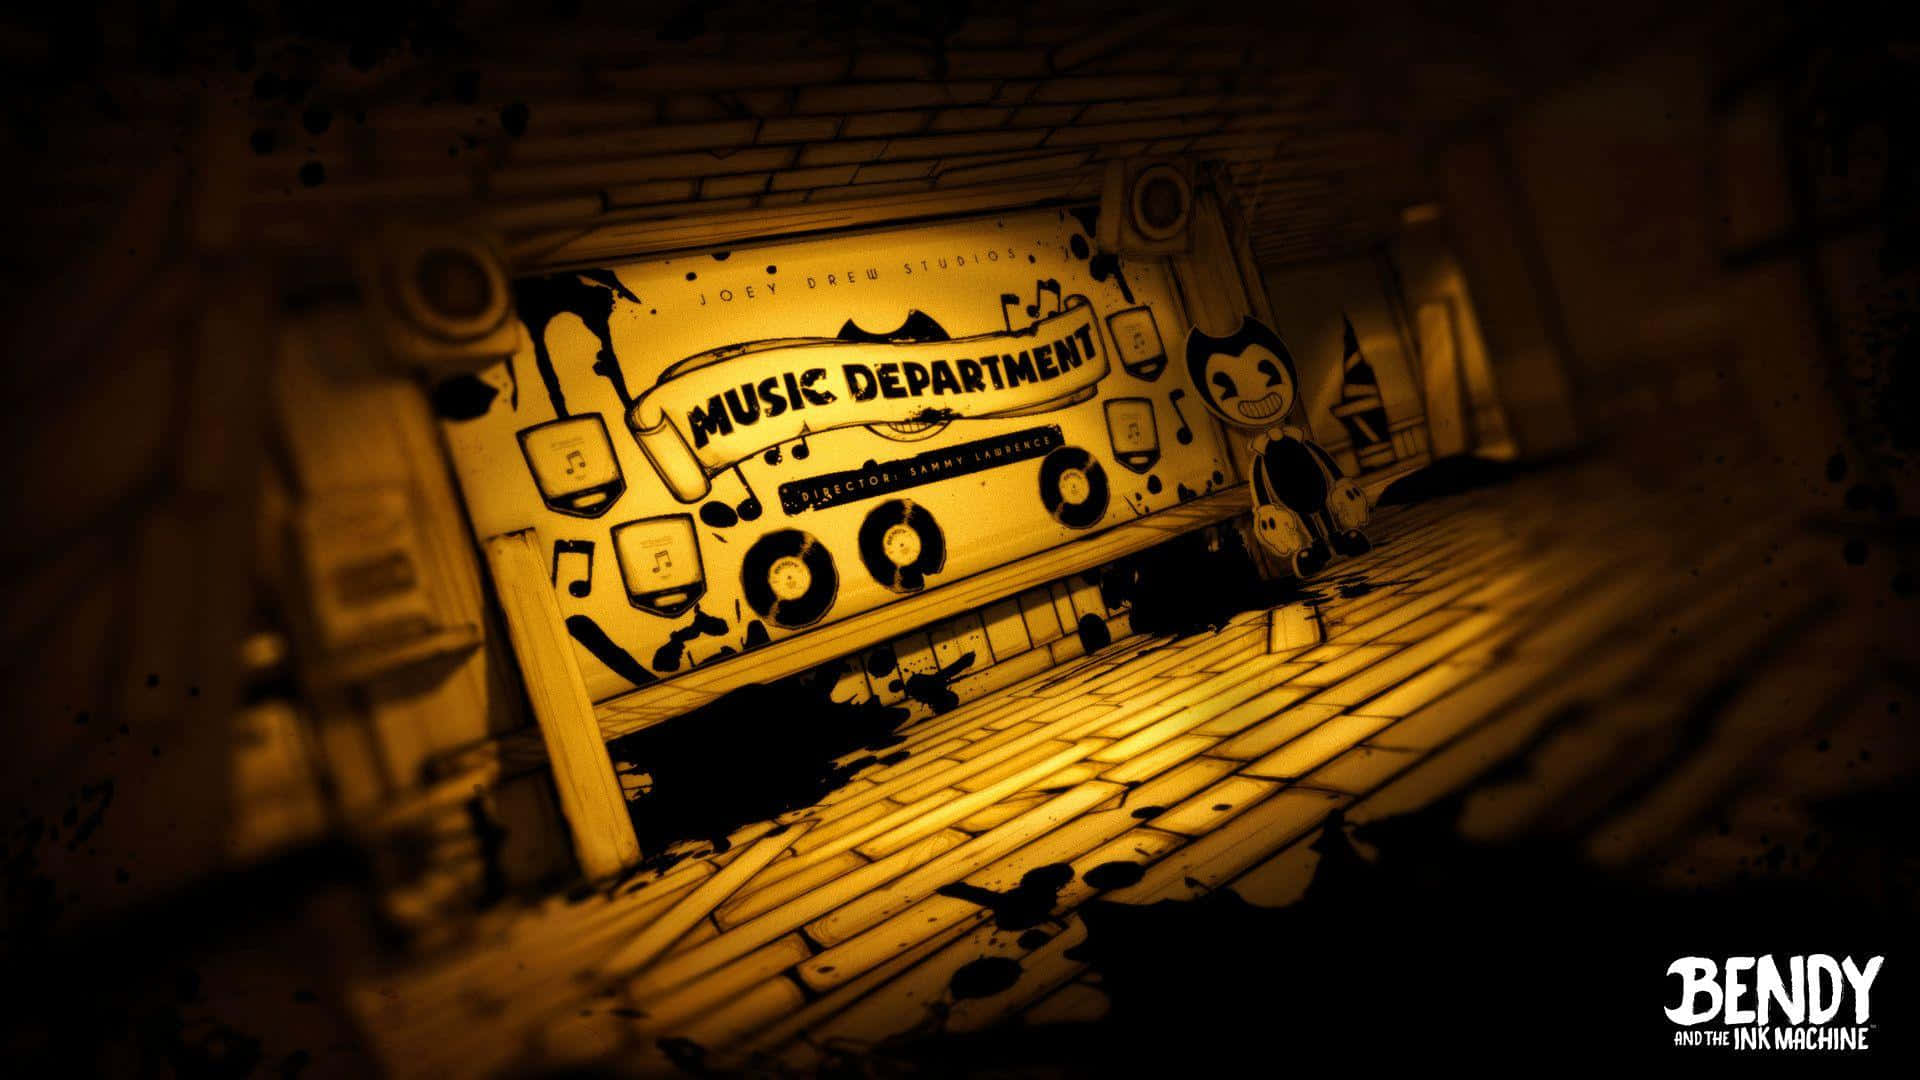 Download A Cartoon-Style Obsession – Bendy and the Ink Machine Wallpaper